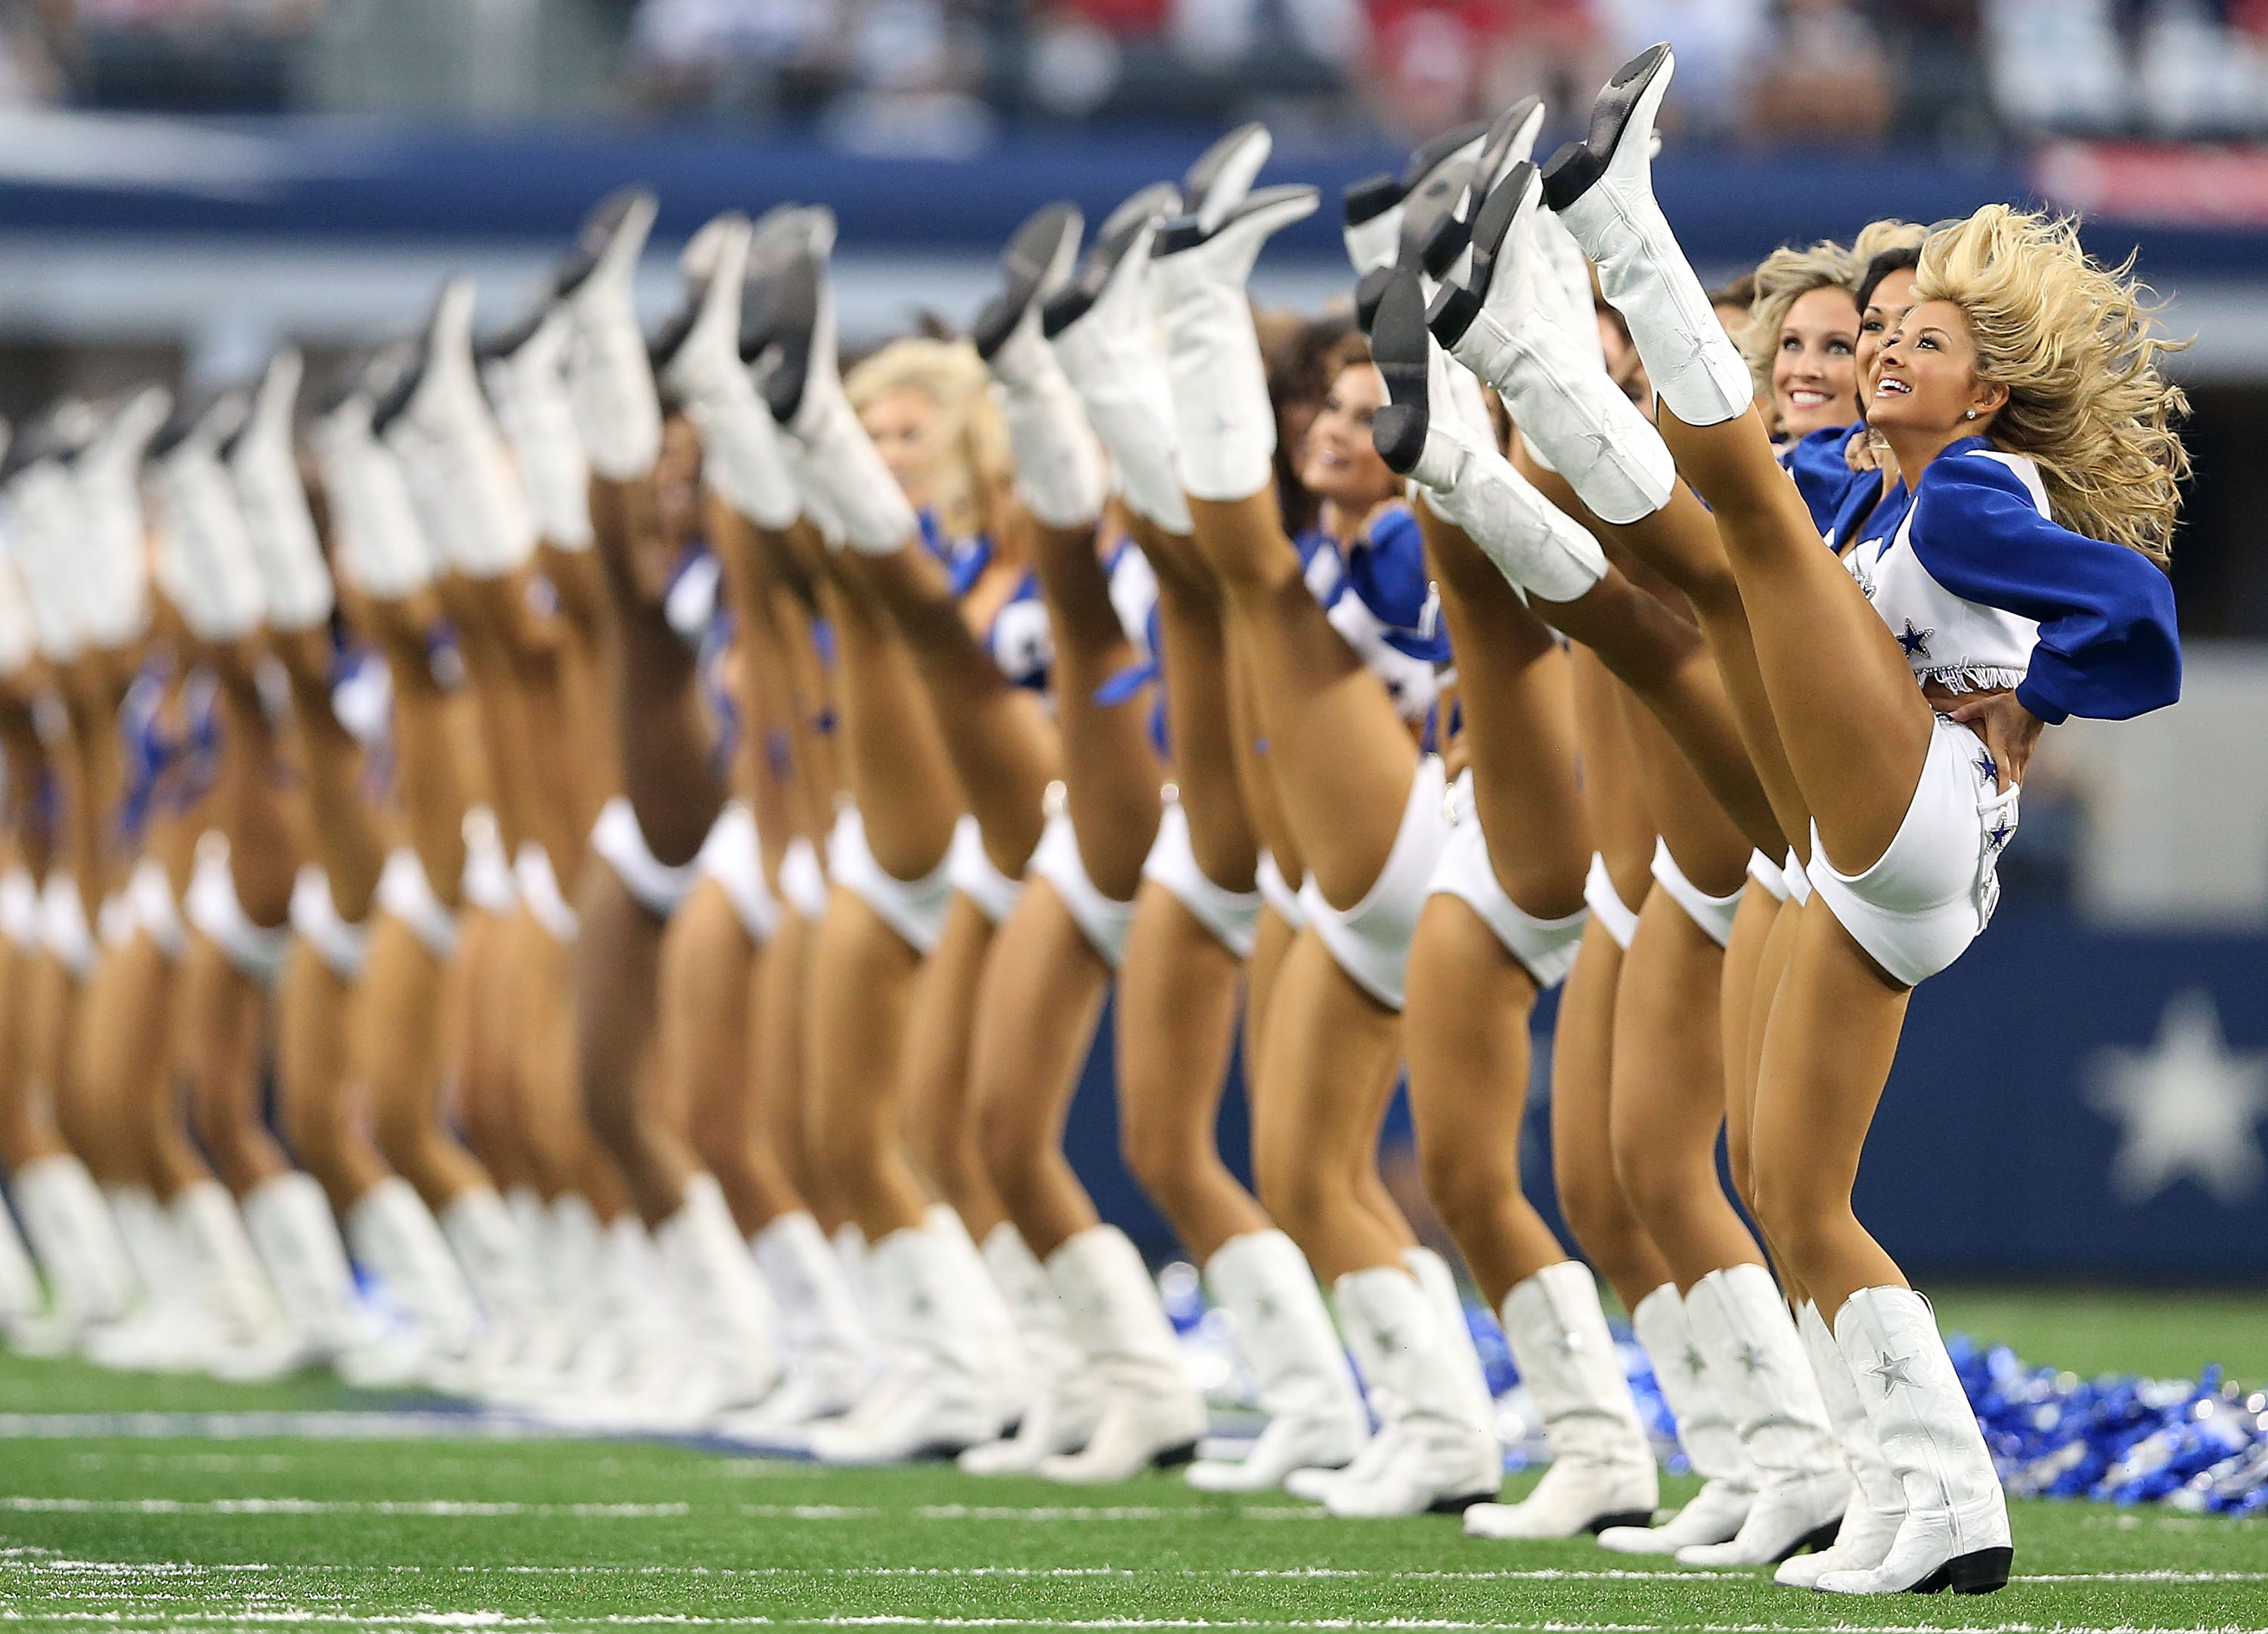 Remembering Suzanne Mitchell, the Longtime Director of the Dallas Cowboys Cheerleaders hq nude picture